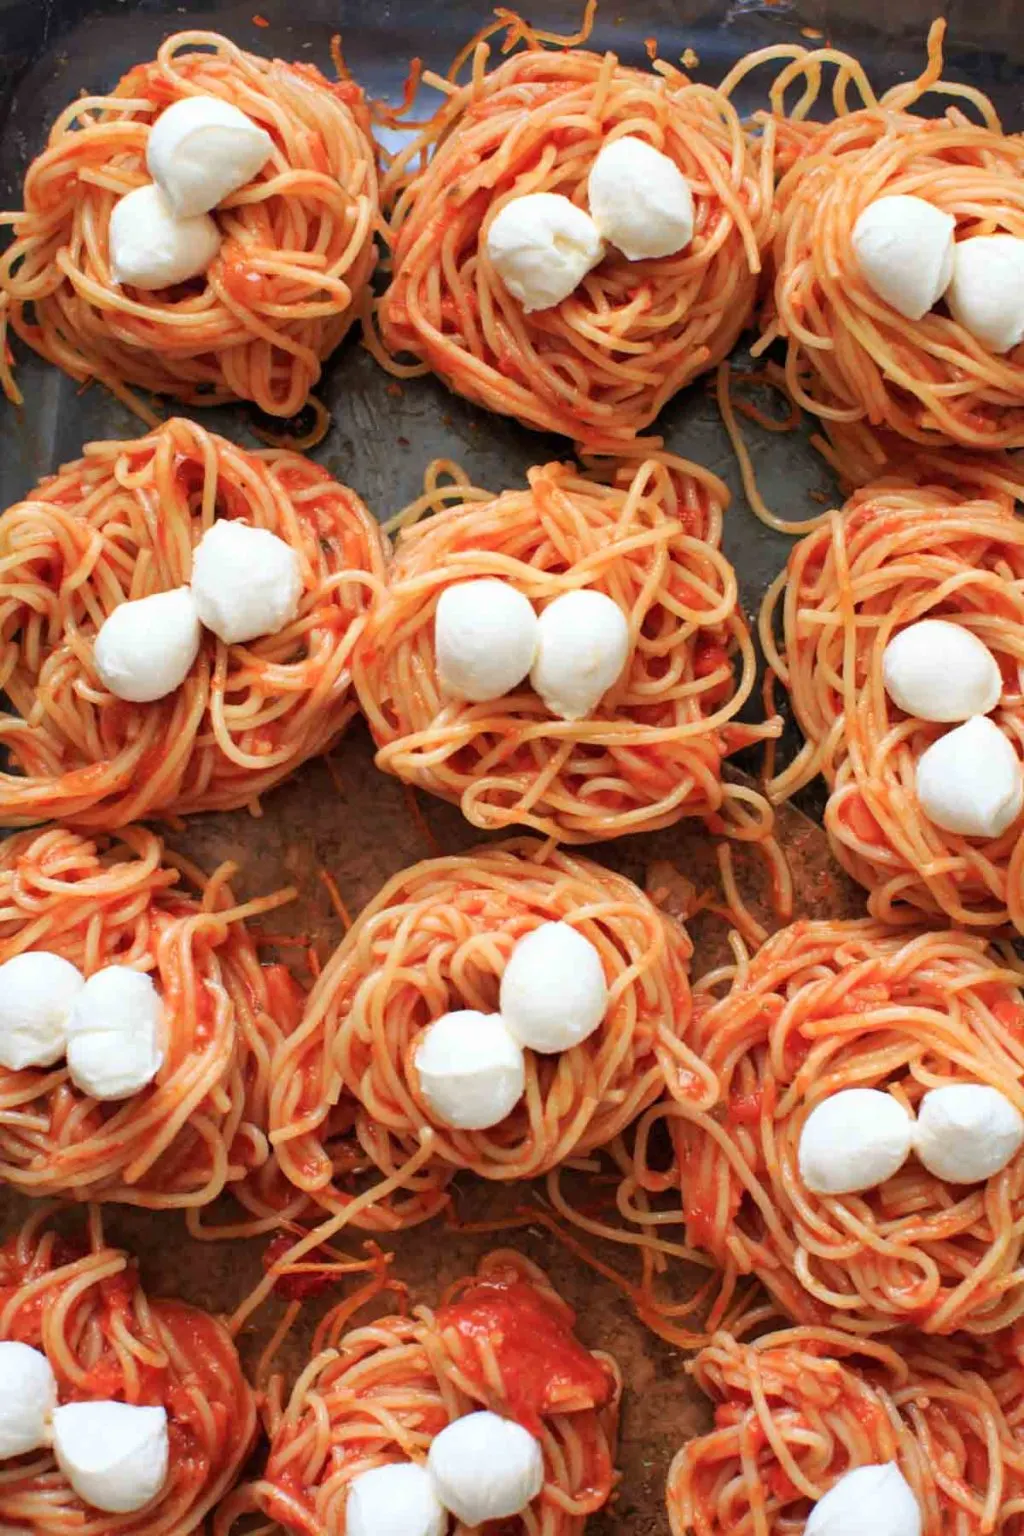 angel hair nests using an egg as binder, before baking